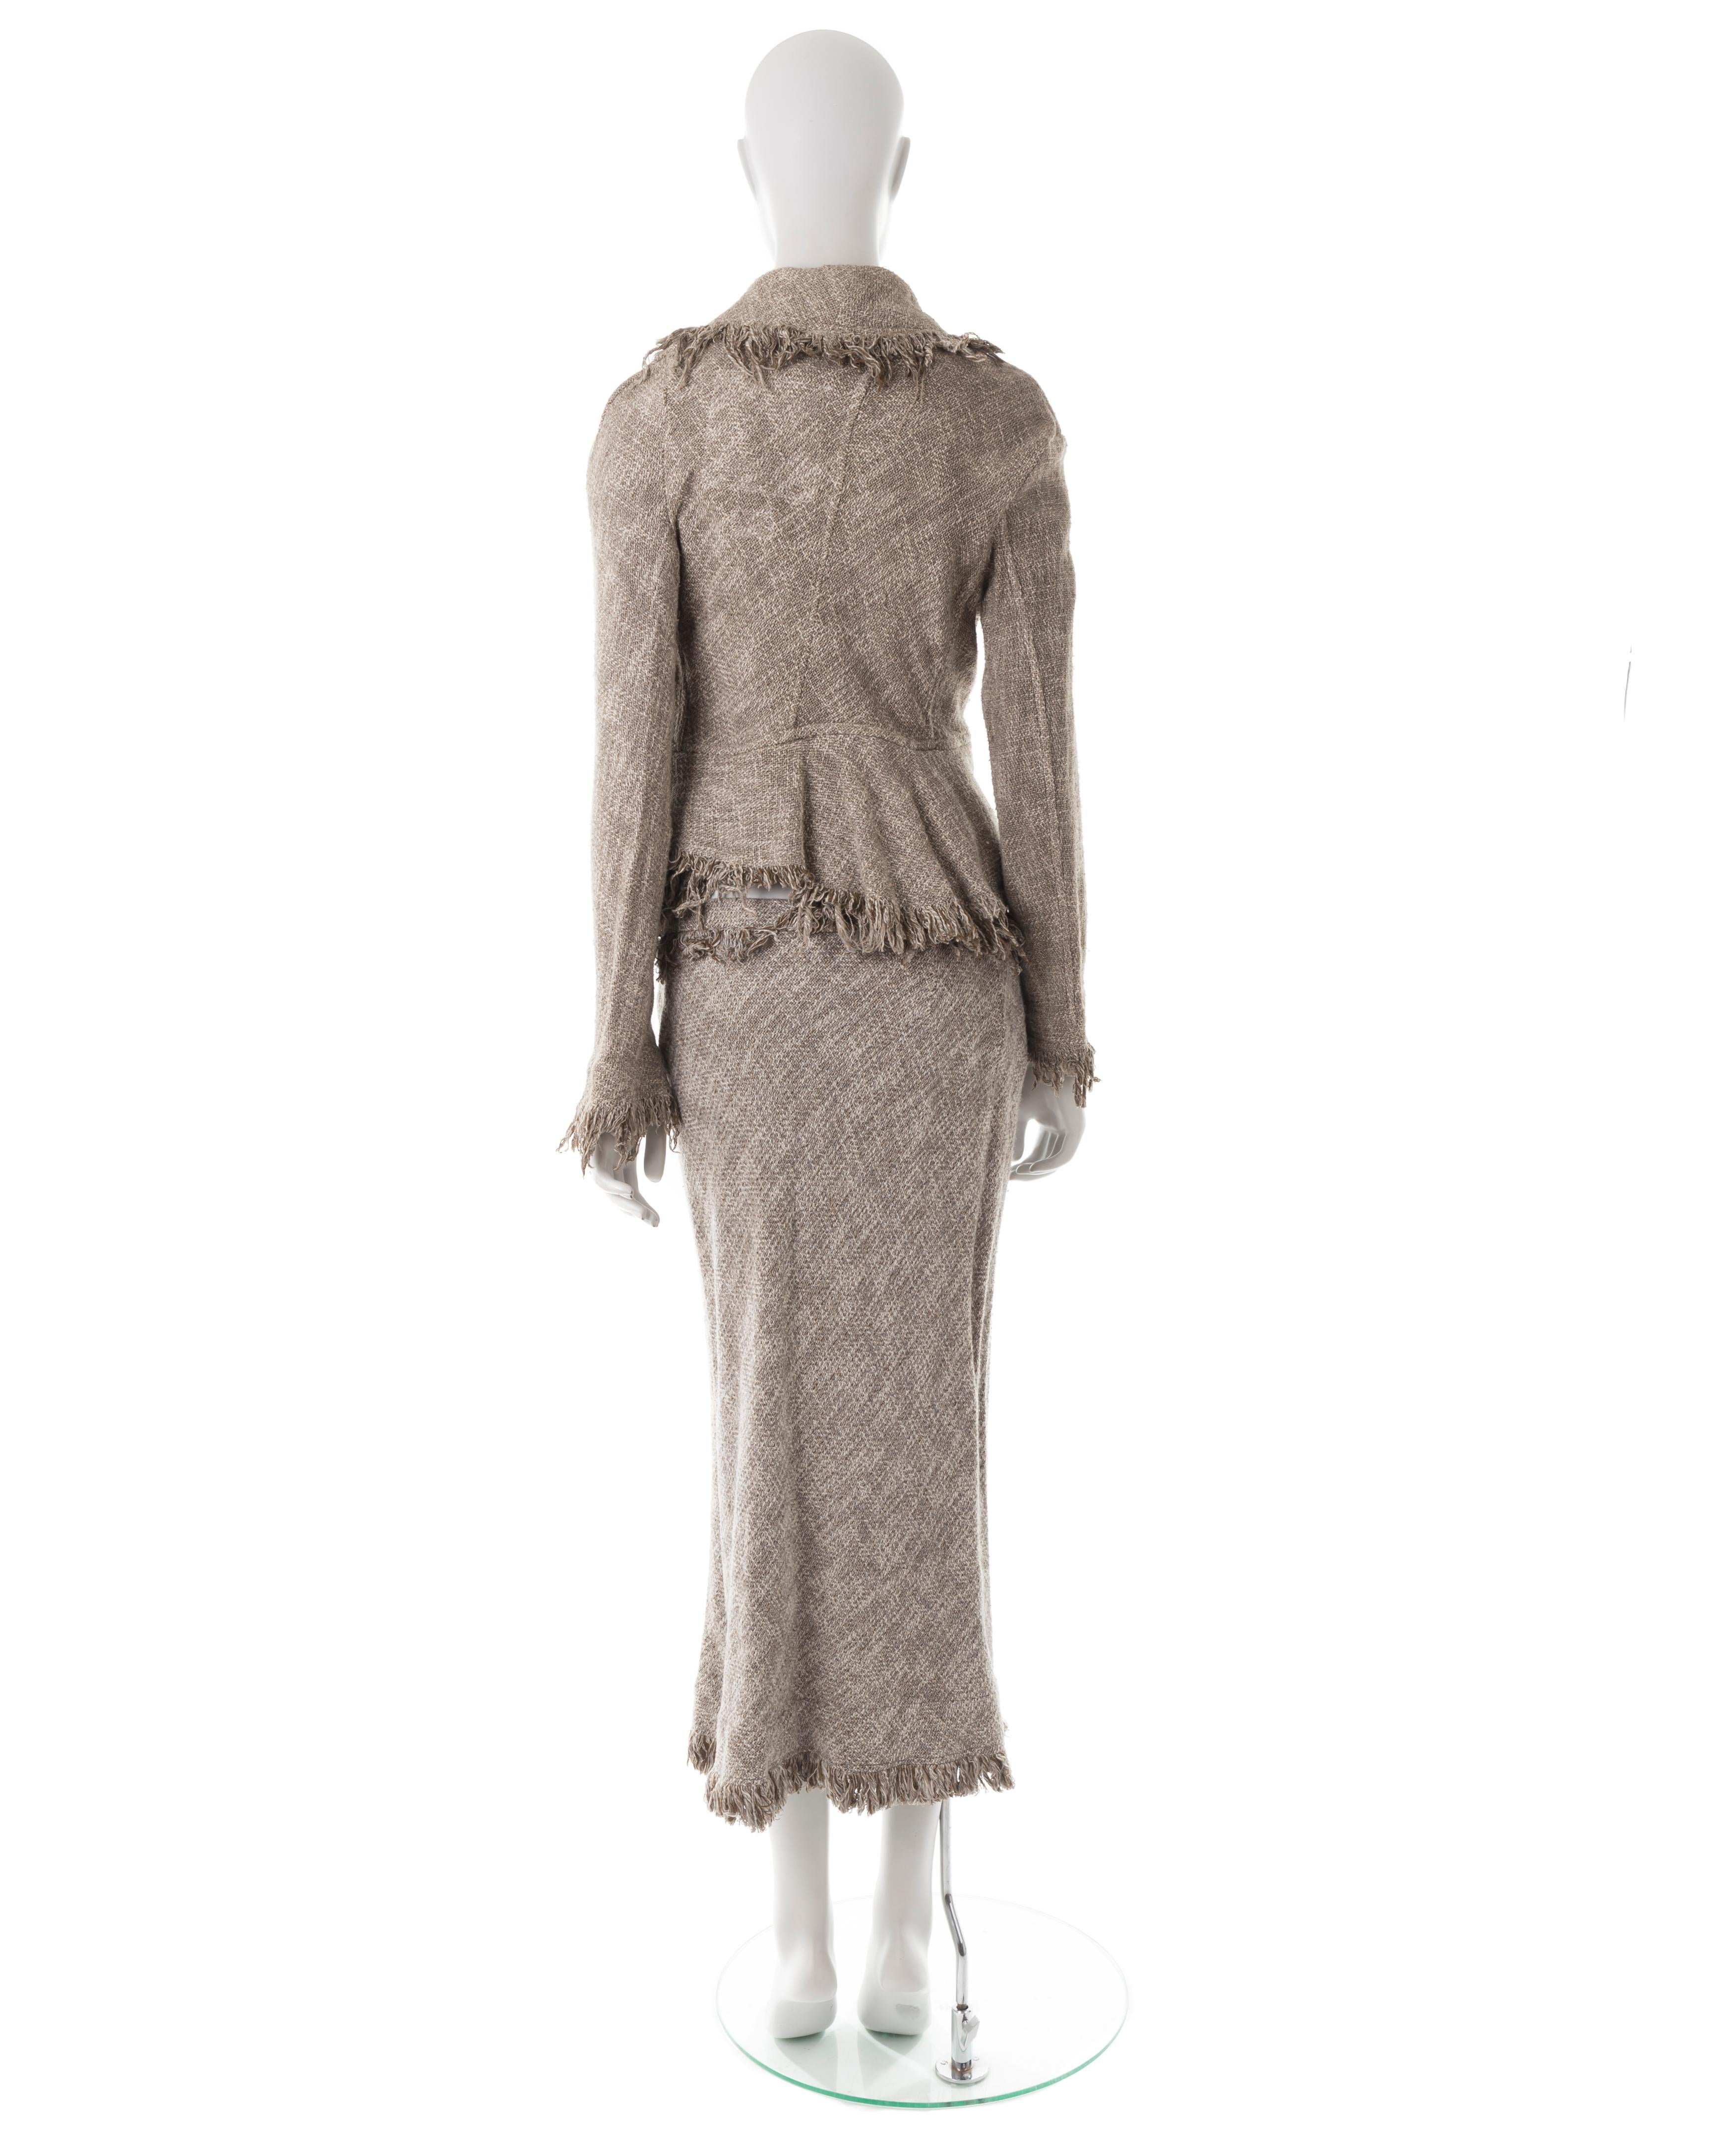 Women's Vivienne Westwood S/S 1997 grey asymmetric frayed wool jacket and skirt suit For Sale